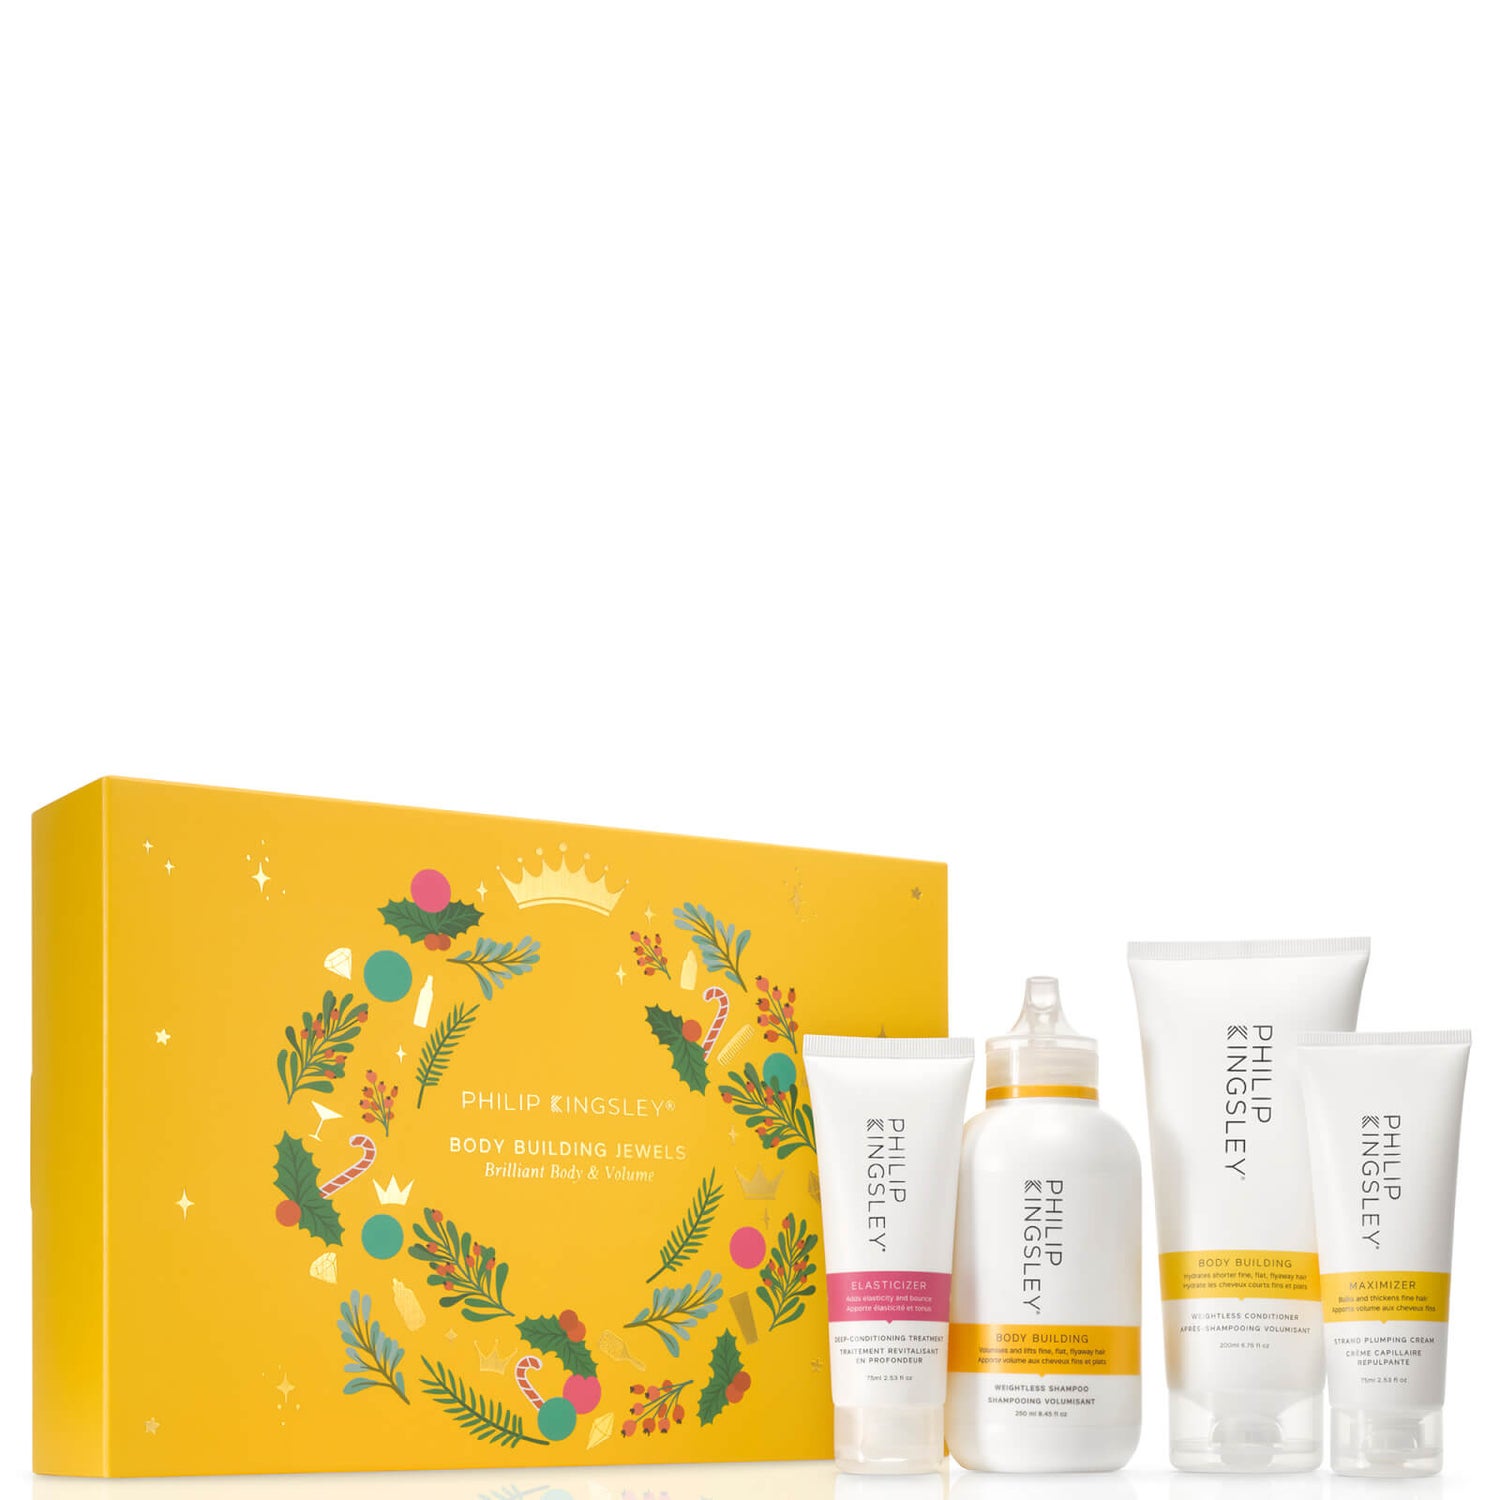 Philip Kingsley Christmas Body Building Jewels Brilliant Body and Volume Set (Worth $128.00)